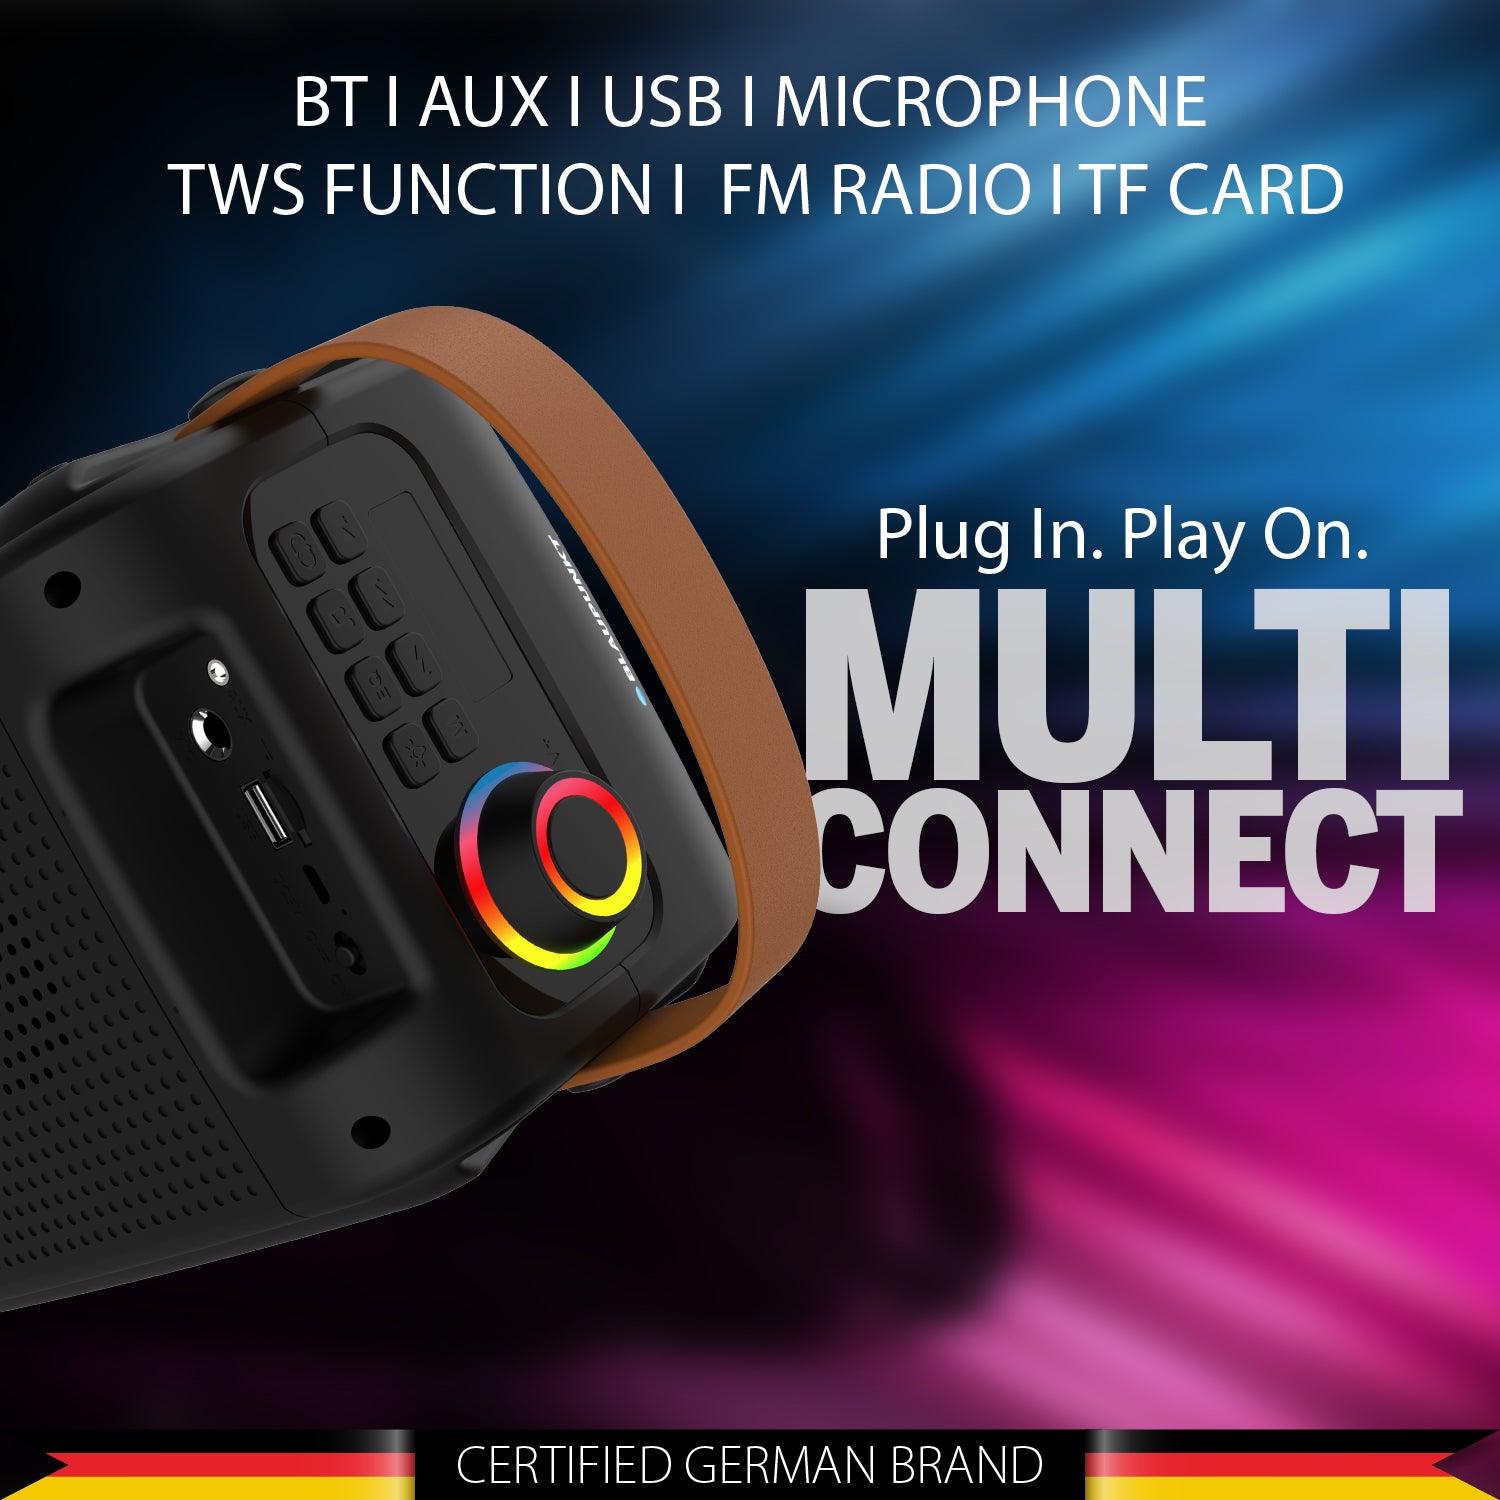 Blaupunkt PS30 | Bluetooth Party Speaker | Microphone TWS Function